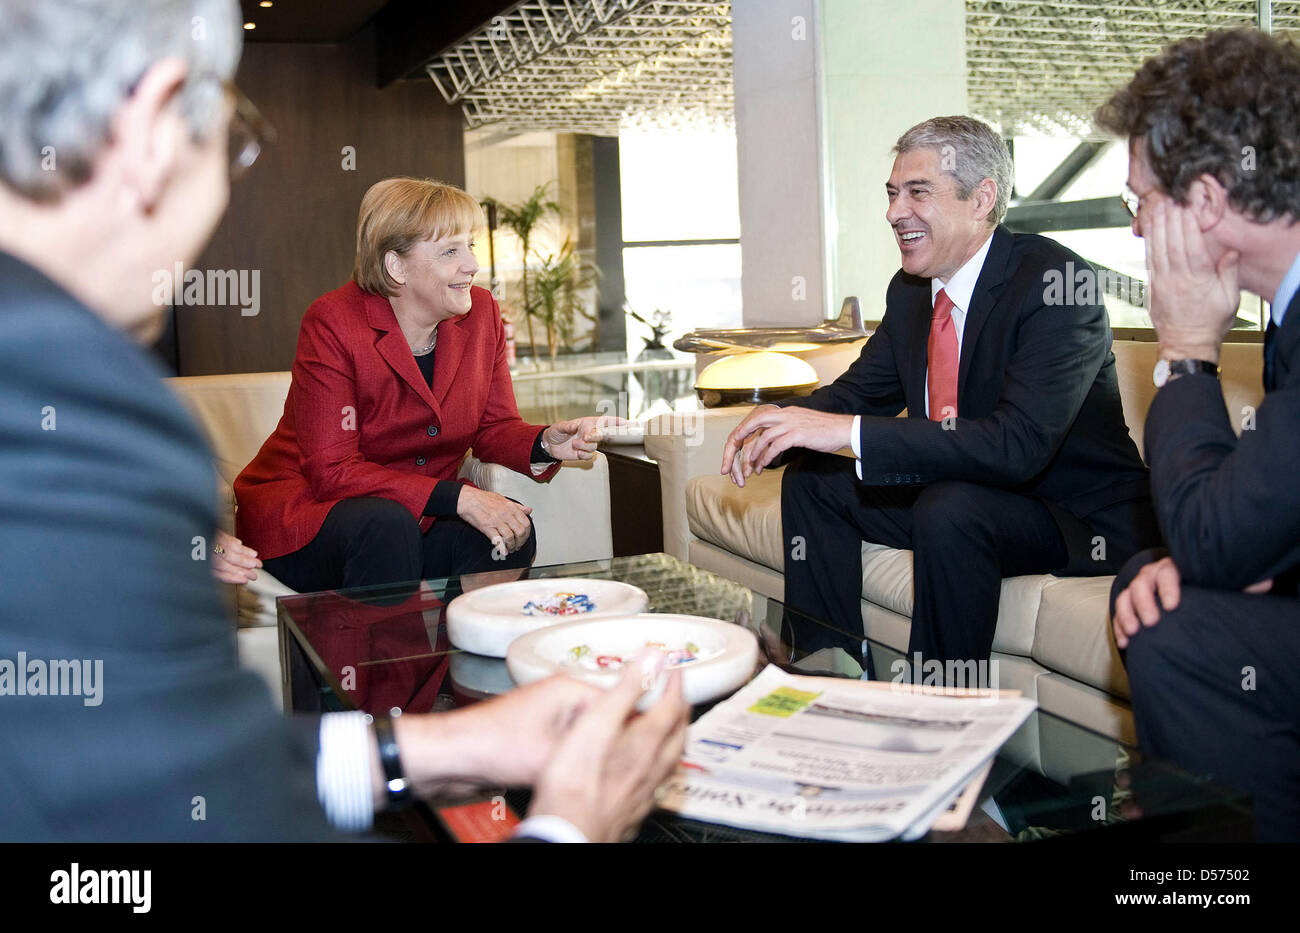 German Chancellor Angela Merkel (2-L) chats with Portugal's Prime Minister Jose Socrates (2-R) at the airport in Lisbon, Portugal, 16 April 2010. Merkel's plane was forced to stop over in Lisbon due to clouds of volcanic ashes thrown out by Icelandic volcano Eyfjalla. Mrs Merkel was on her way back to Germany following her visit to the USA. She will not be able to continue to Germa Stock Photo